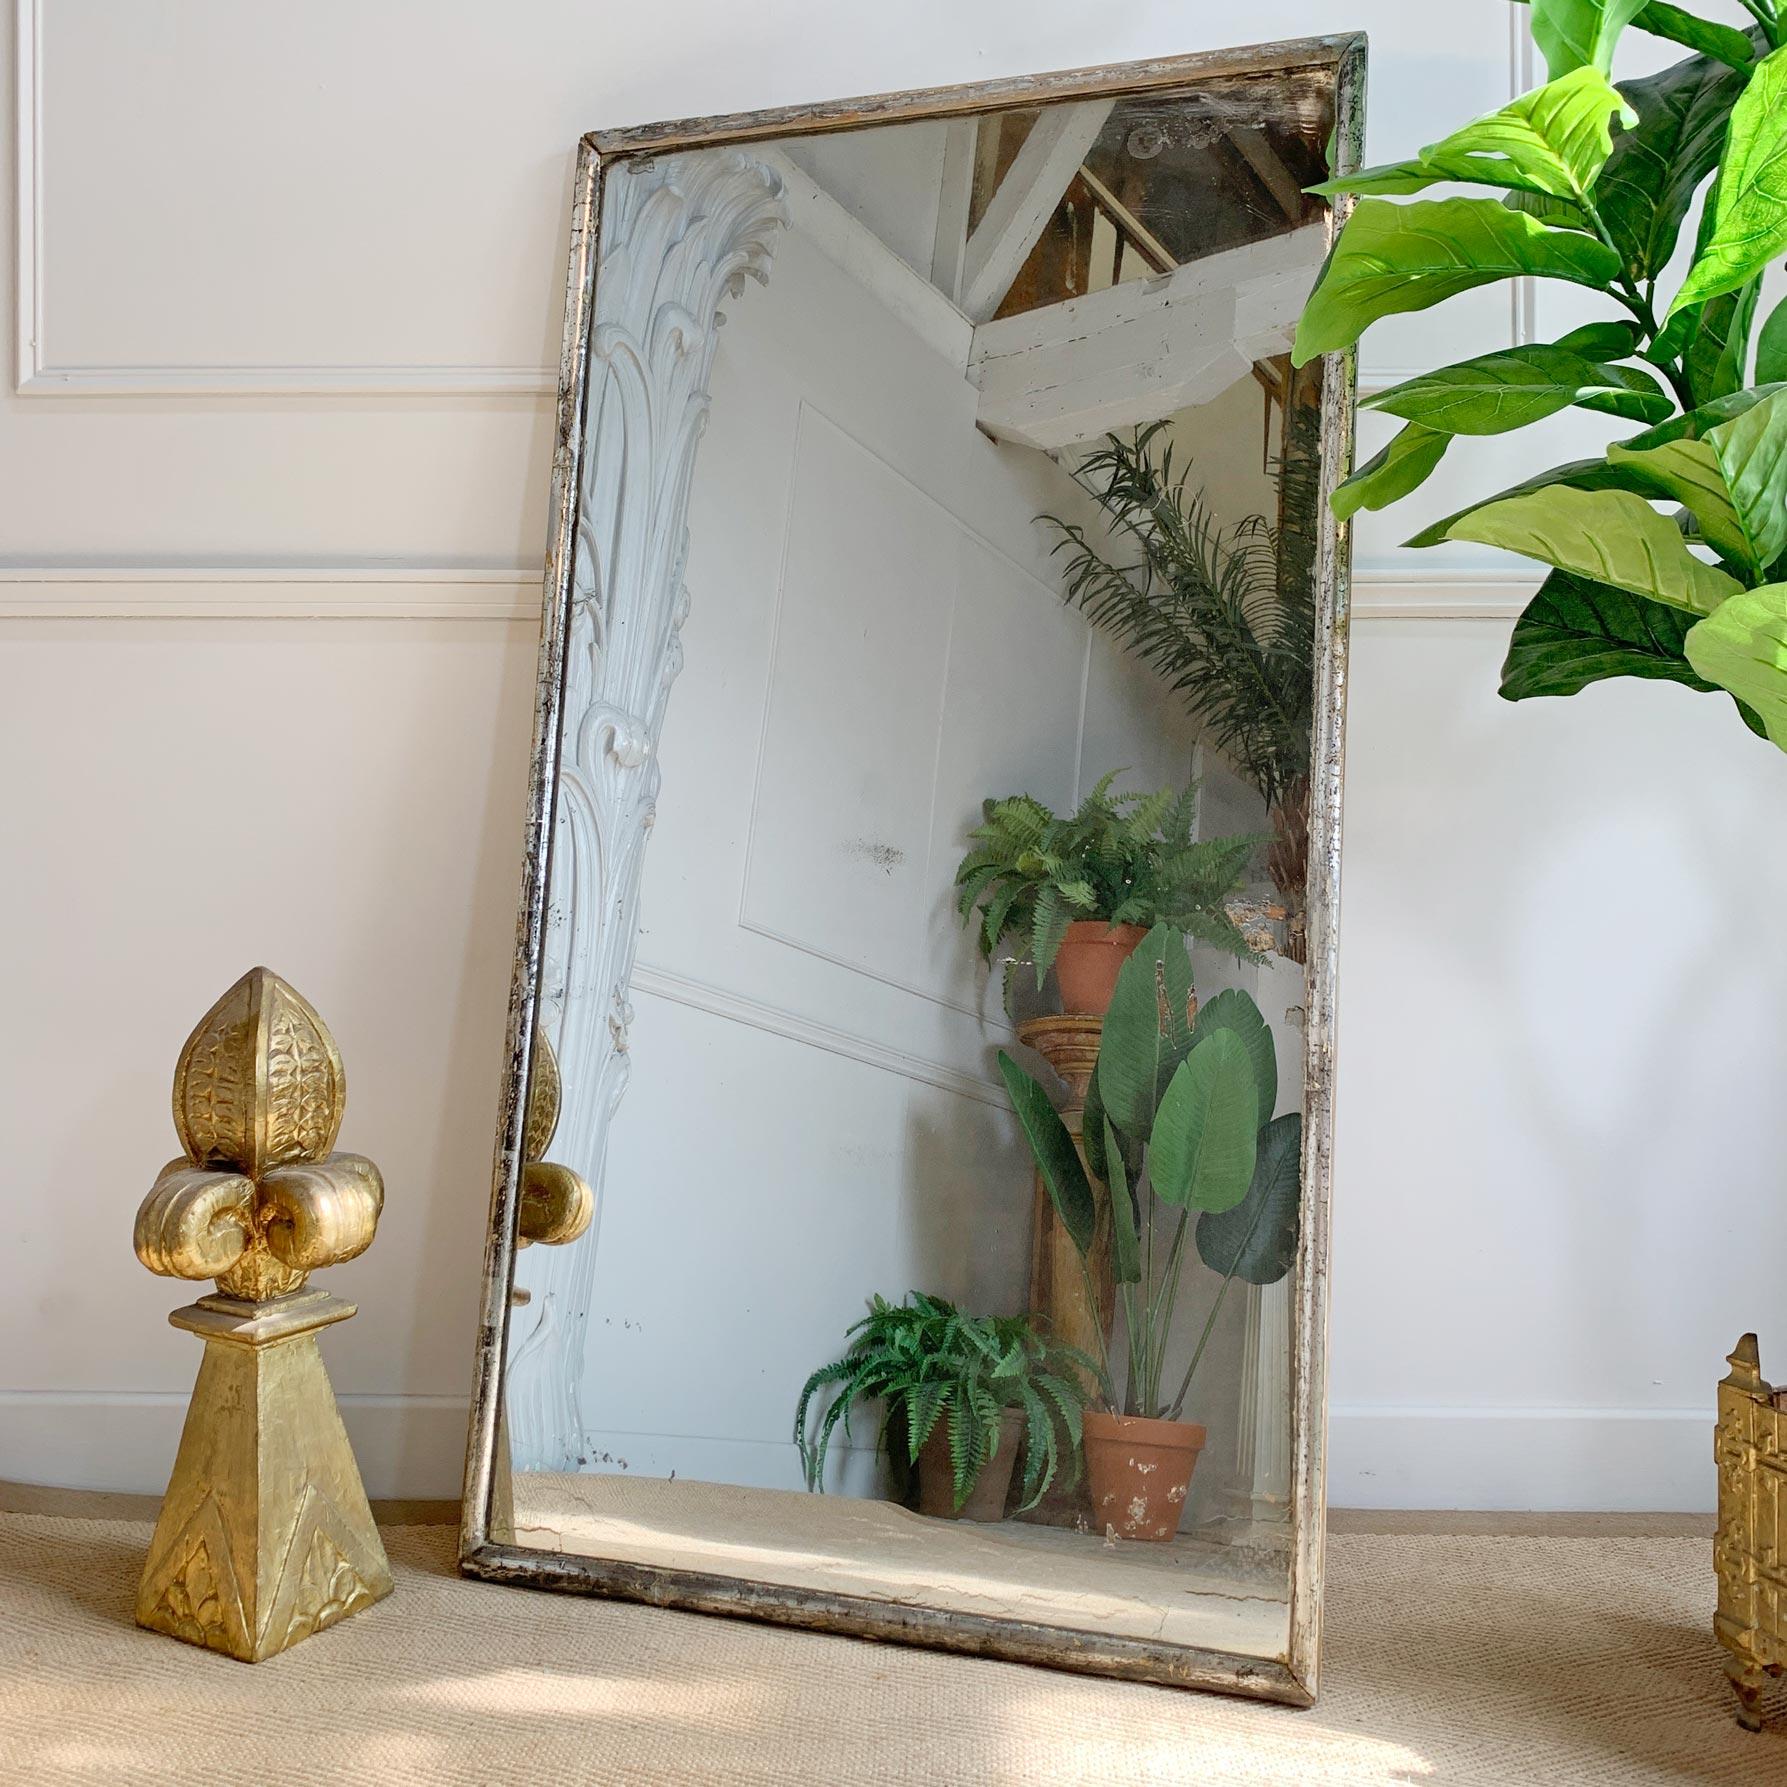 A remarkable 19th century silver gilt narrow framed rectangular mirror, original foxed mercury plate with the most incredible glittering. Wear to the frame commensurate with age, the simplistic nature of the frame coupled with the silver gilding and